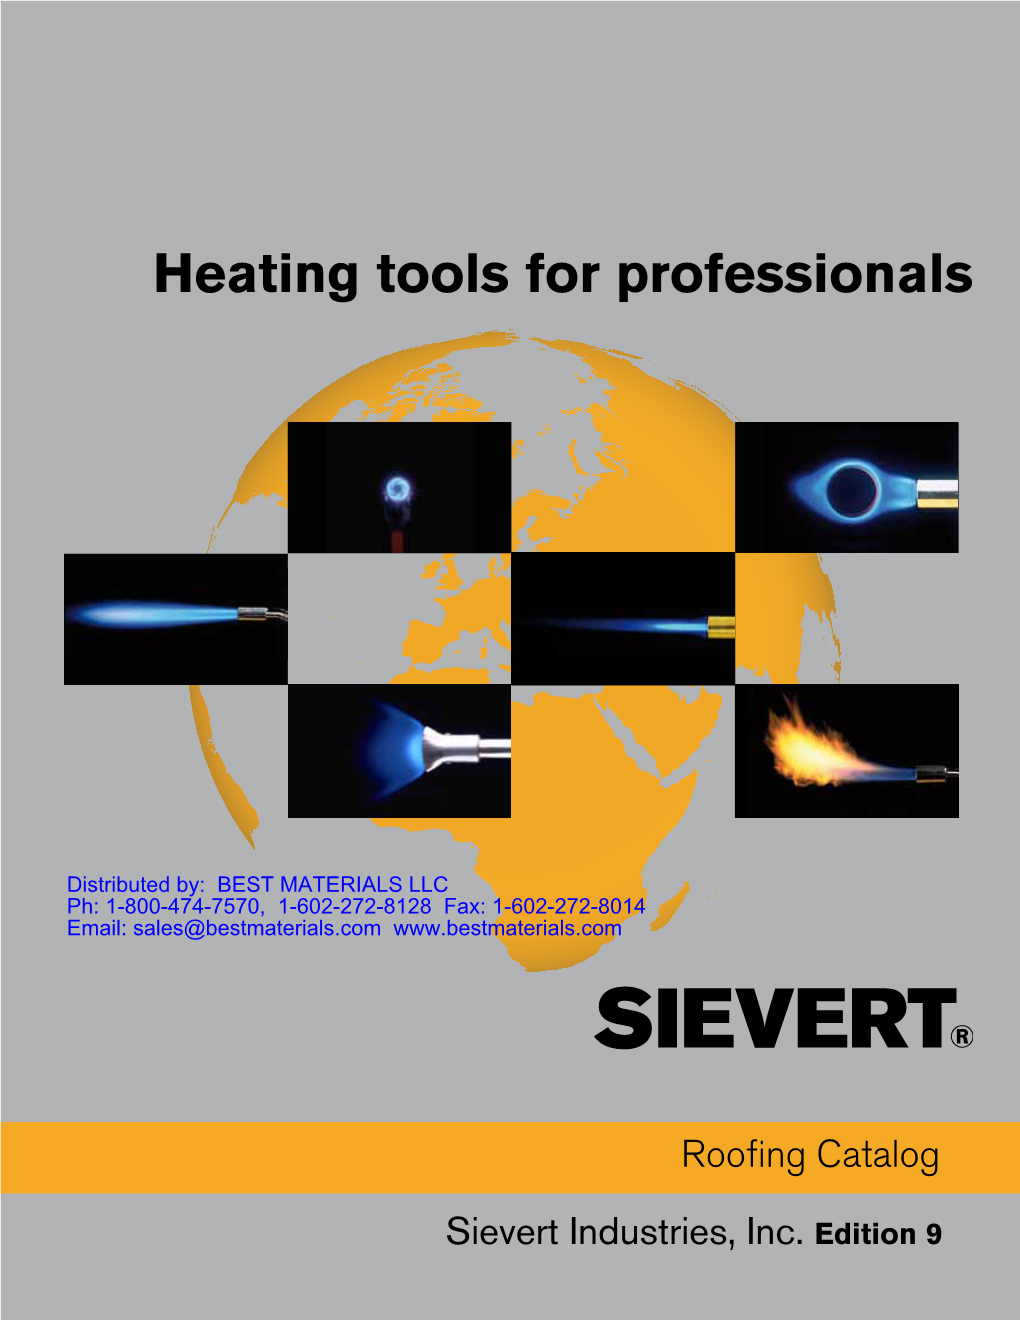 Sievert Roofing Products Catalog